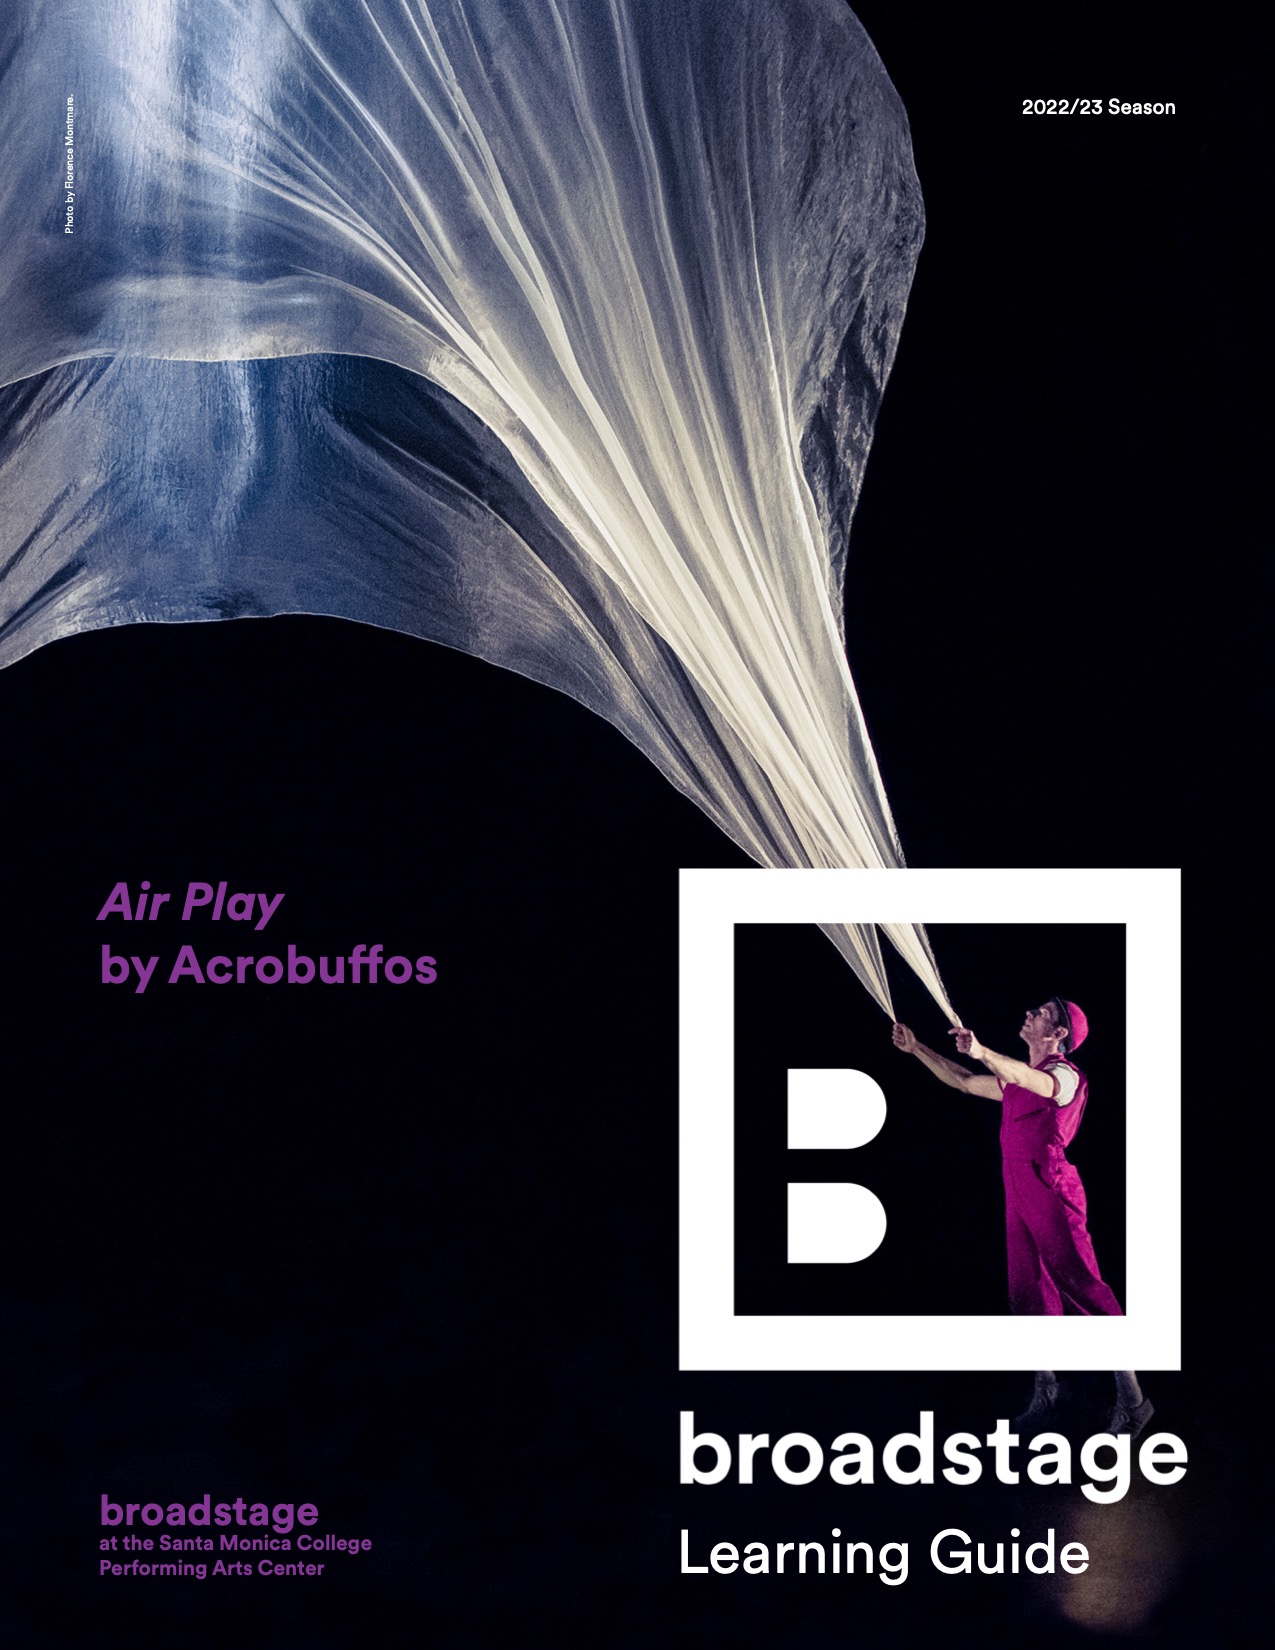 2022/23 Season; Air Play Learning Guide; broadstage at the Santa Monica College Performing Arts Center. A dancer graces the cover image while casting a drapery in a circus-style movement and flow. Photo by Florence Montmare.